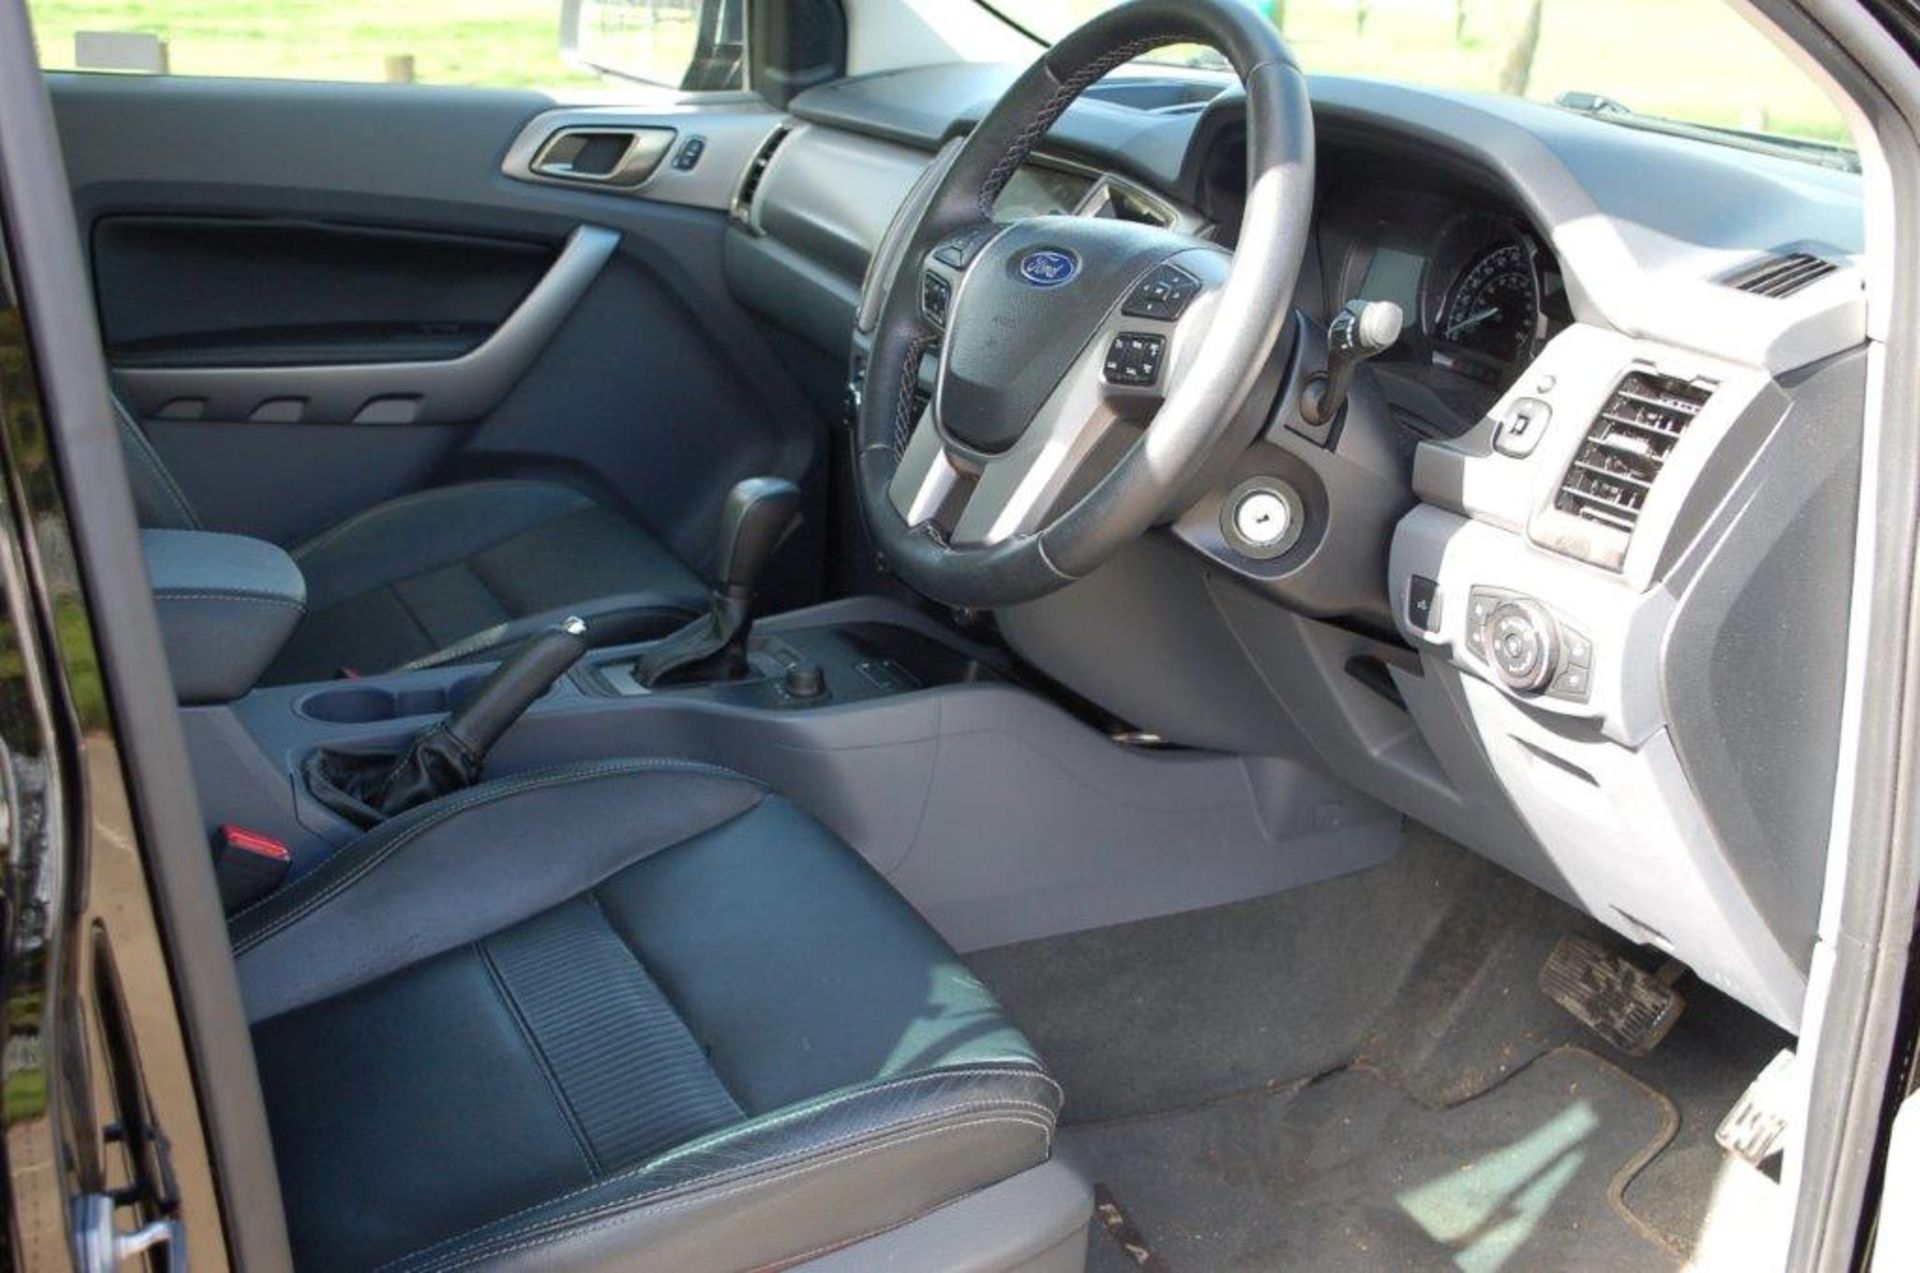 Ford RANGER LIMITED 4X4 2.2 6-SPEED AUTOMATIC DCB - Image 7 of 11